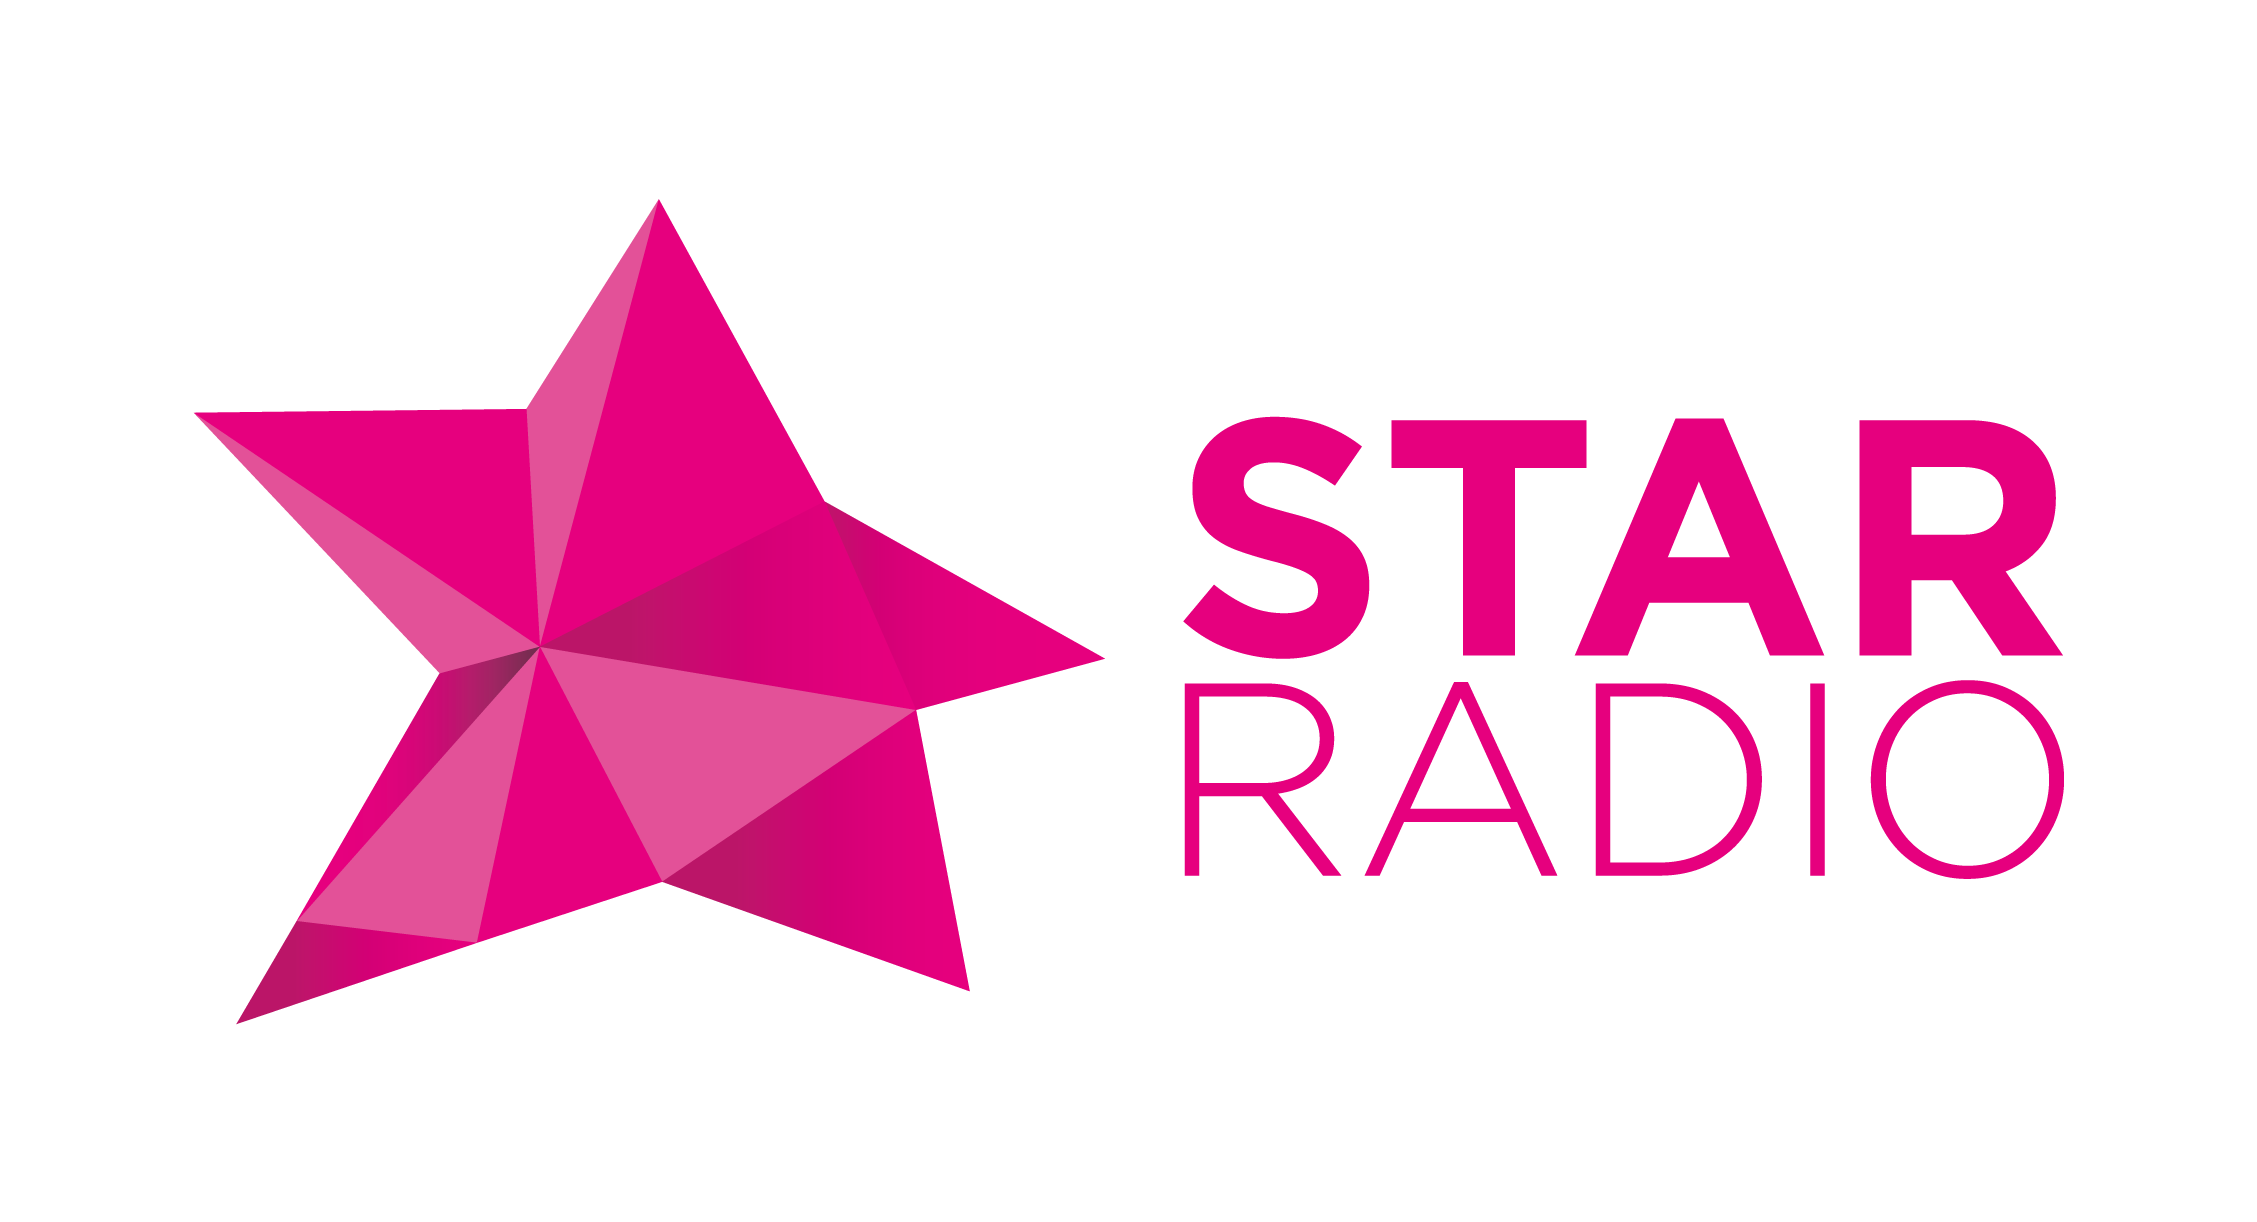 Star Radio North East Saved from Closure